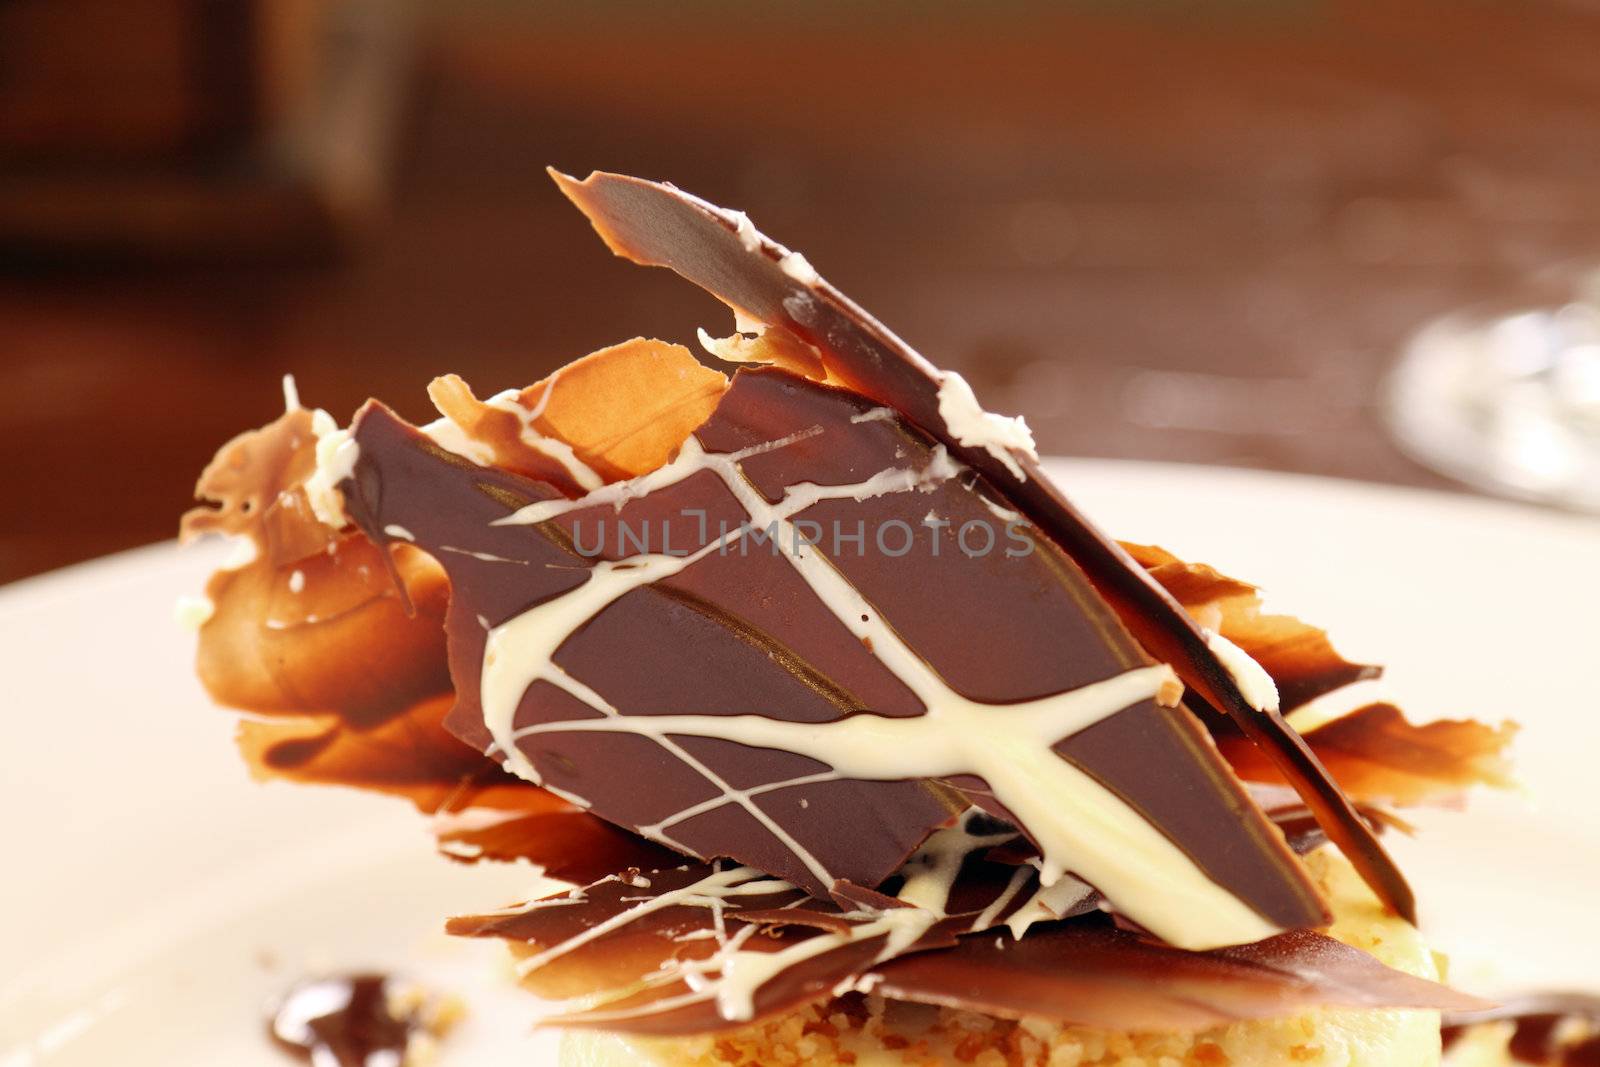 Delicious dark chocolate shards with streaks of white chocolate.